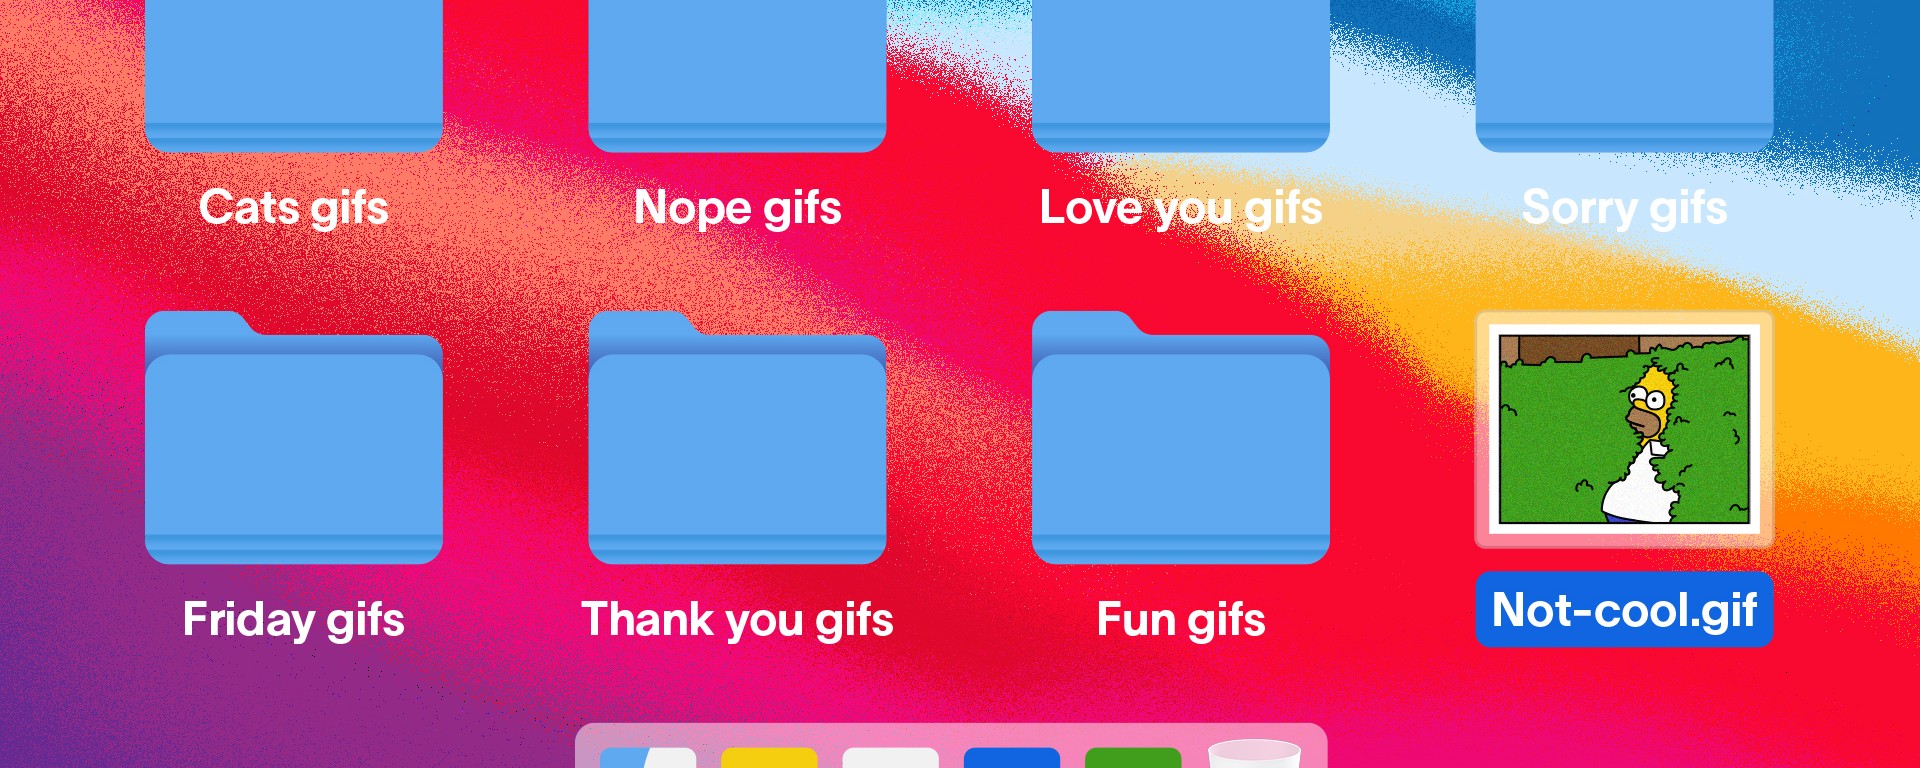 When should you not use GIFs?